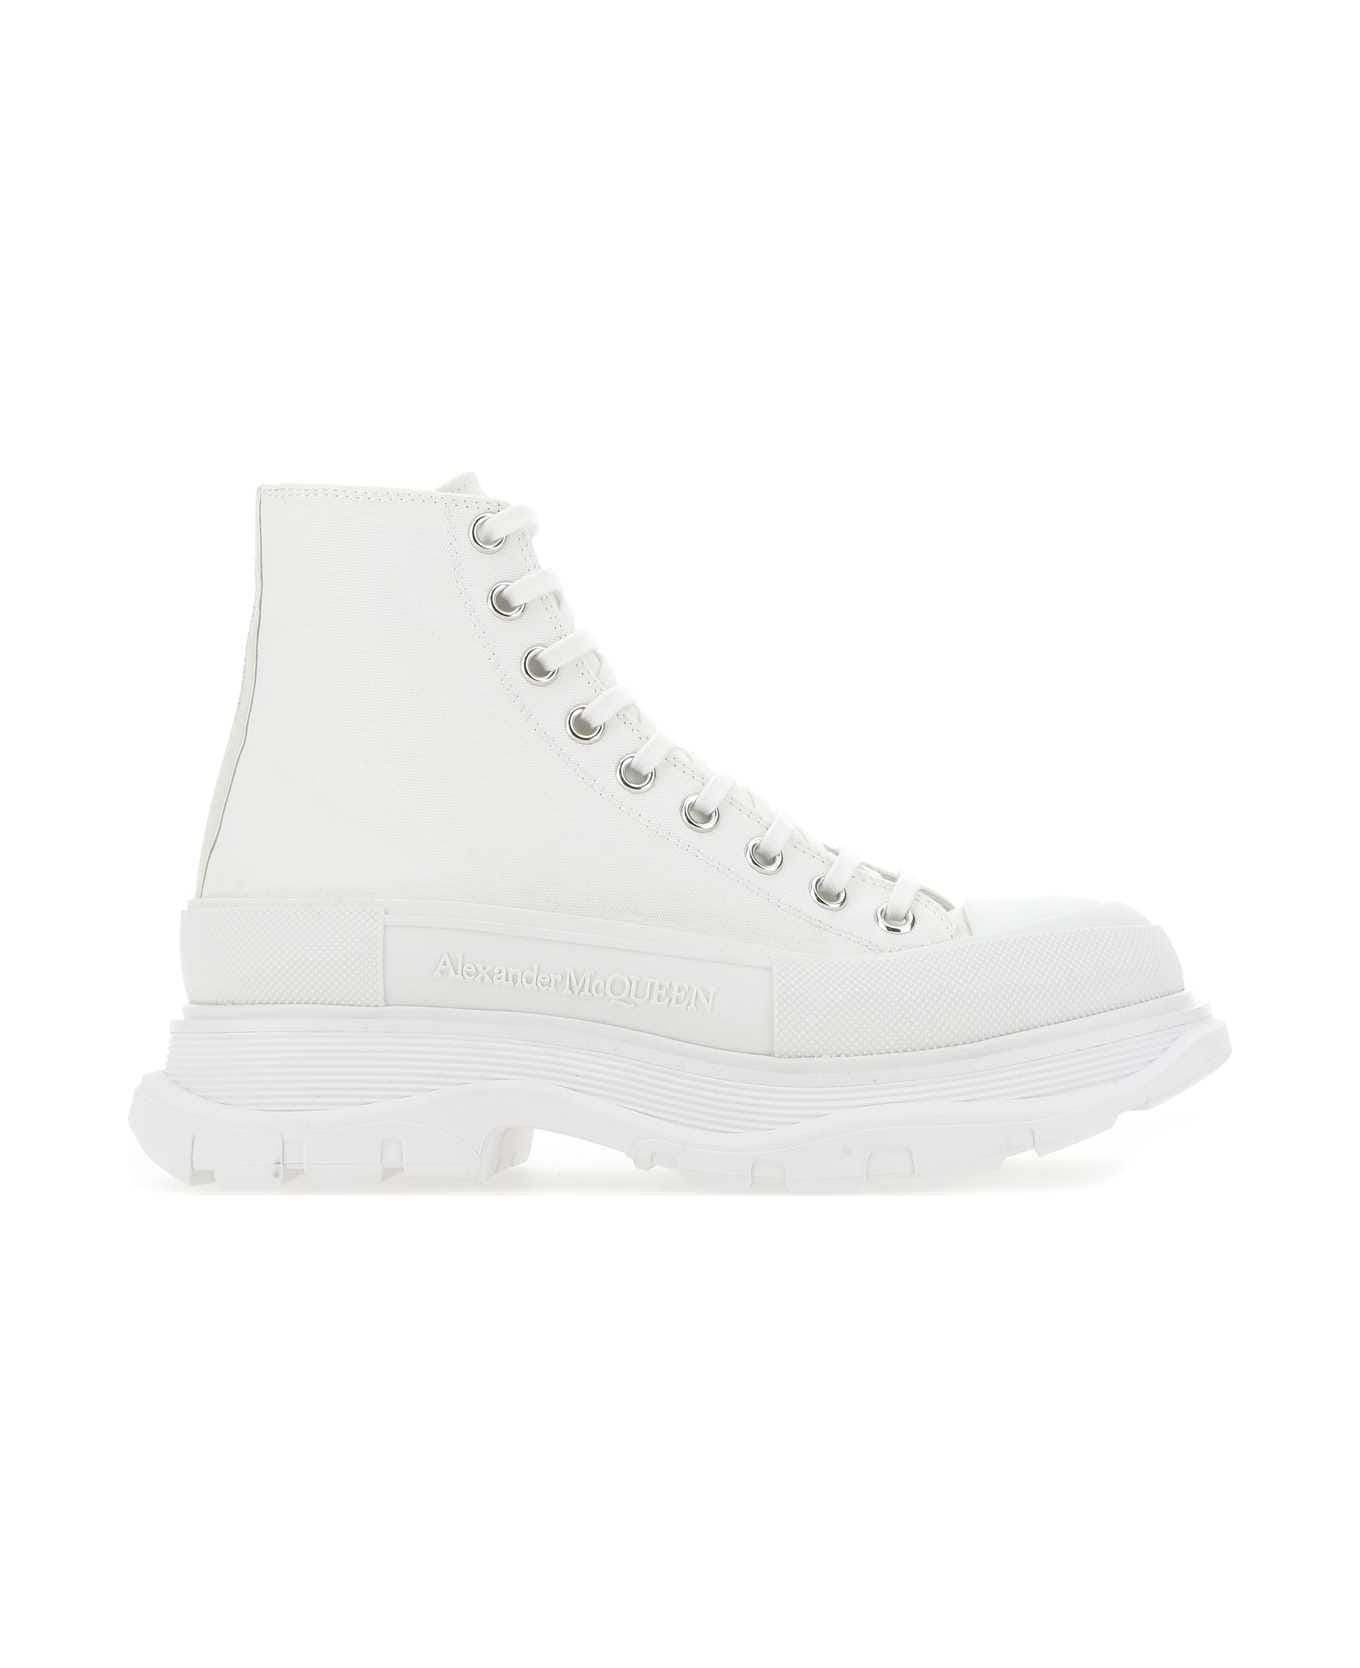 Alexander McQueen White Canvas And Rubber Tread Slick Sneakers - 9000 スニーカー